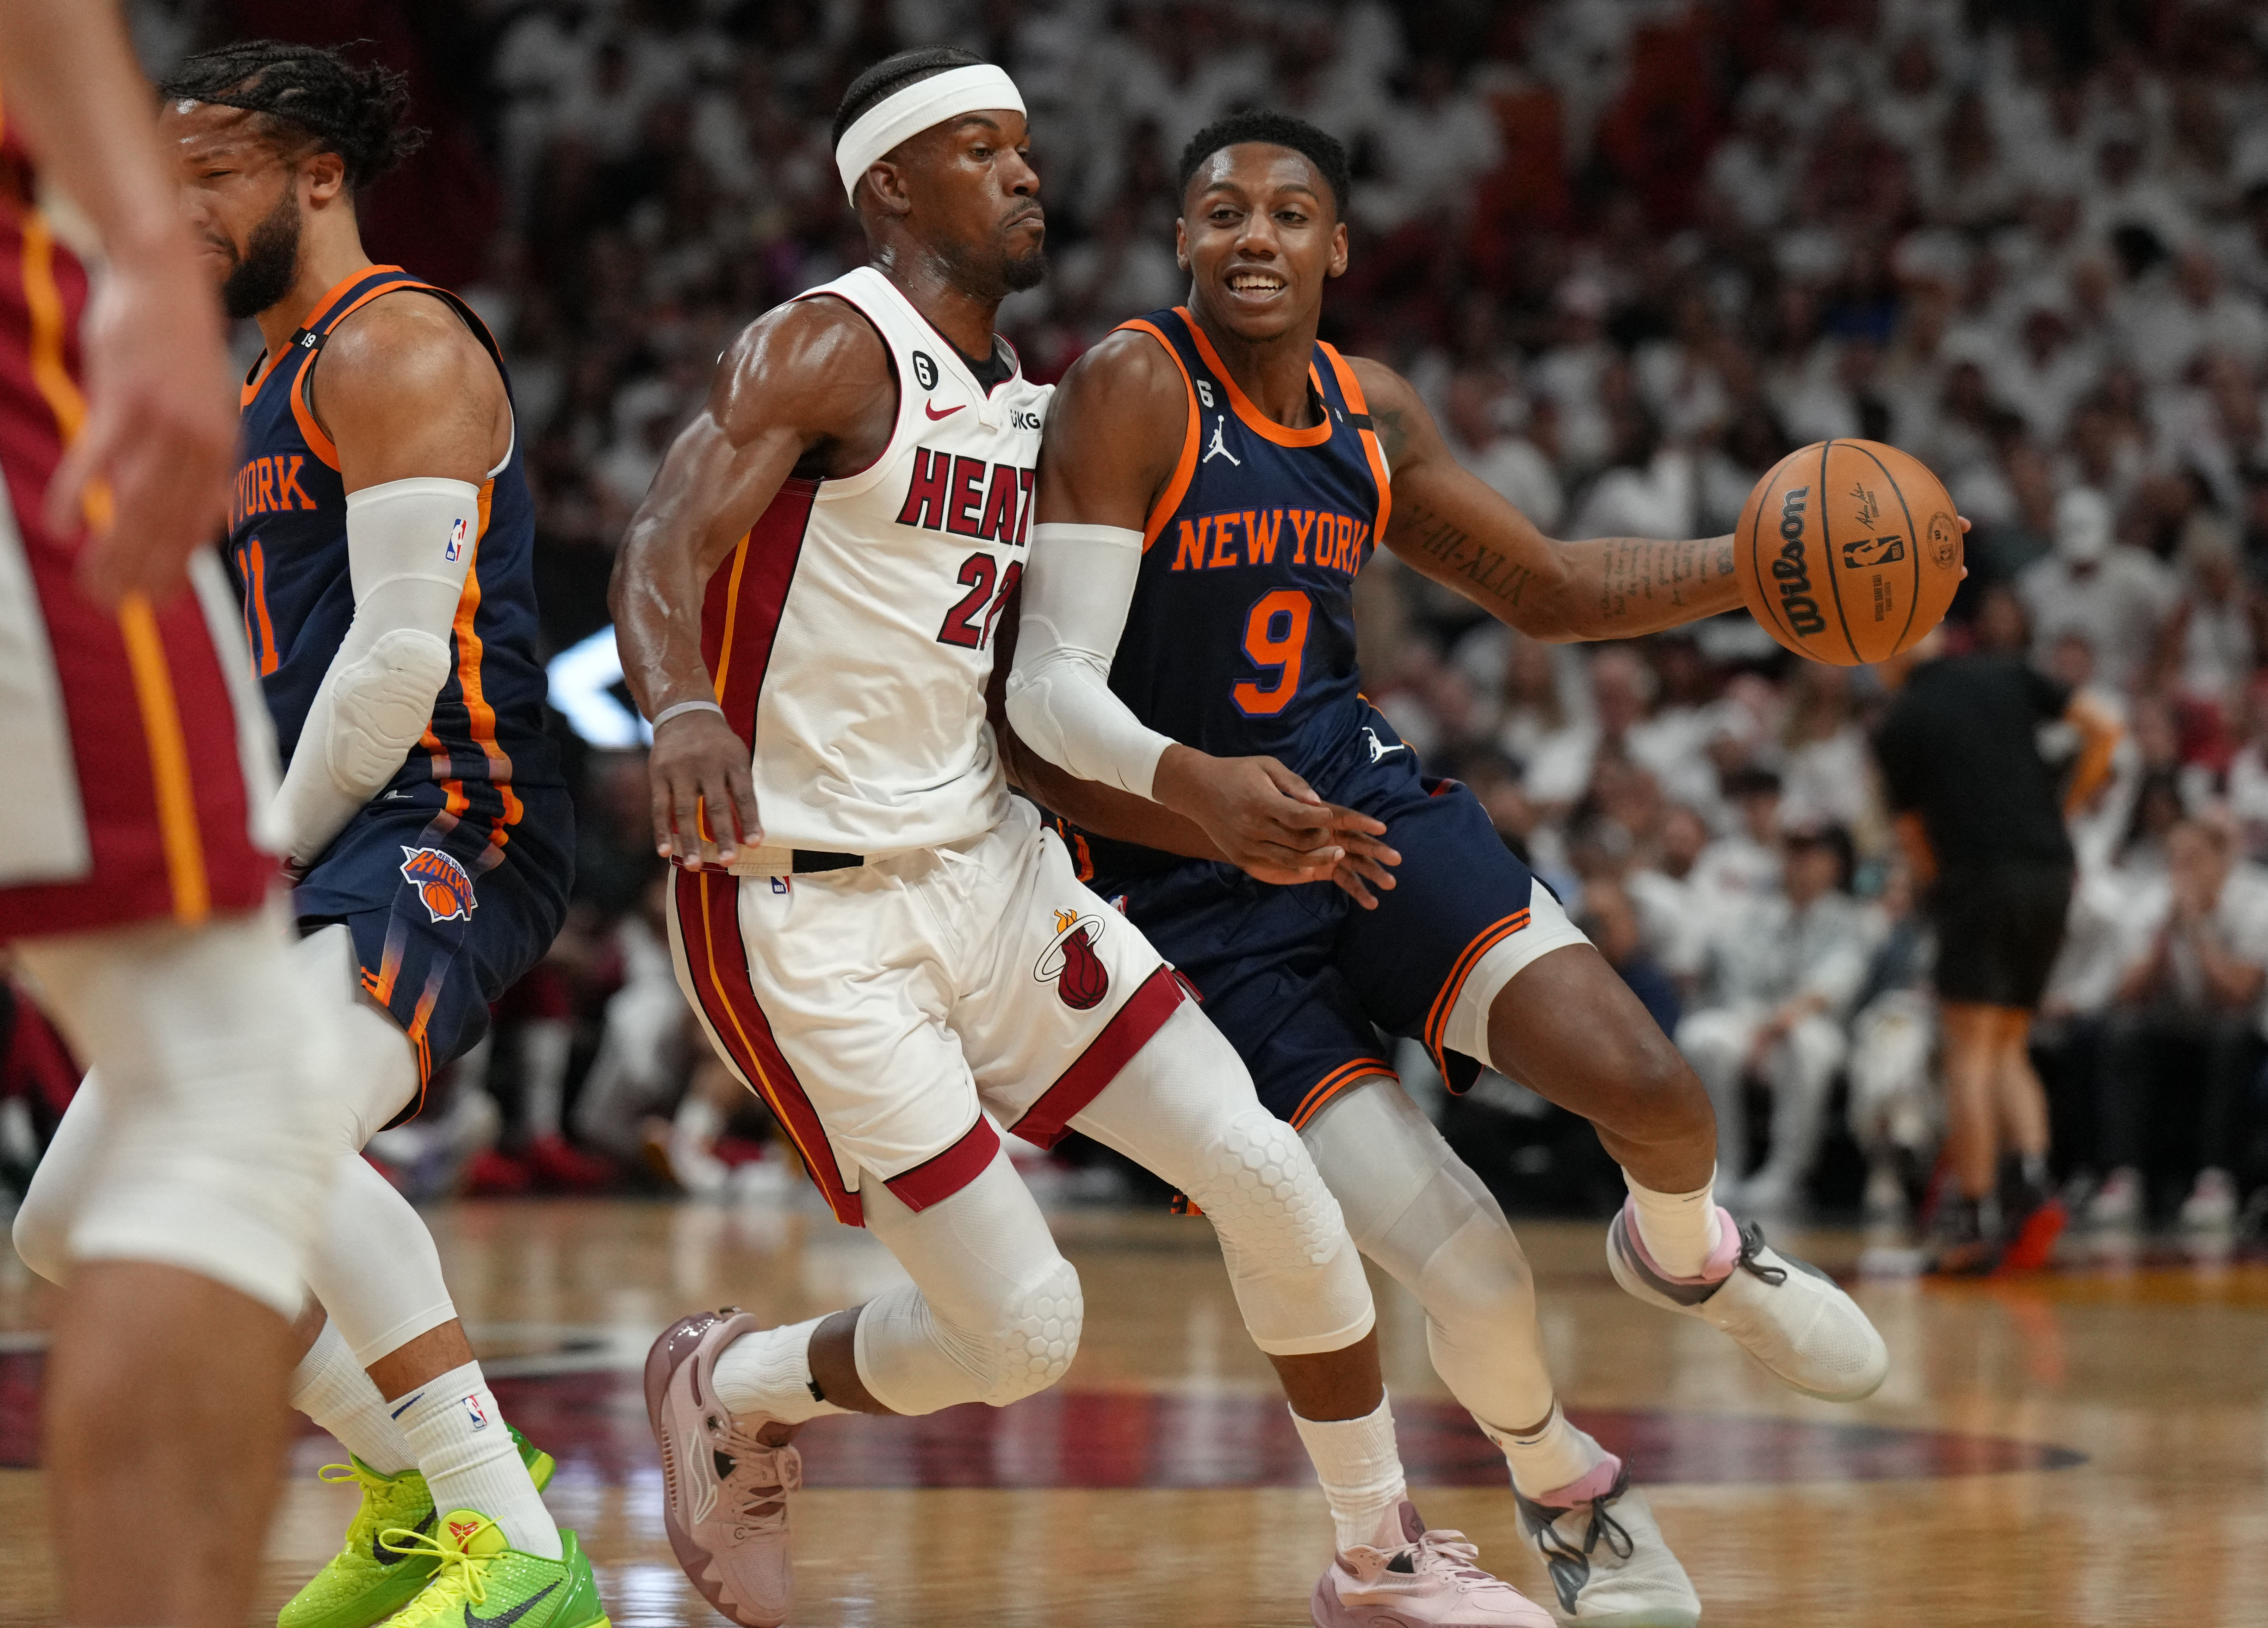 Jimmy Butler and the Heat Close Out the 76ers in Game 6 - The New York Times